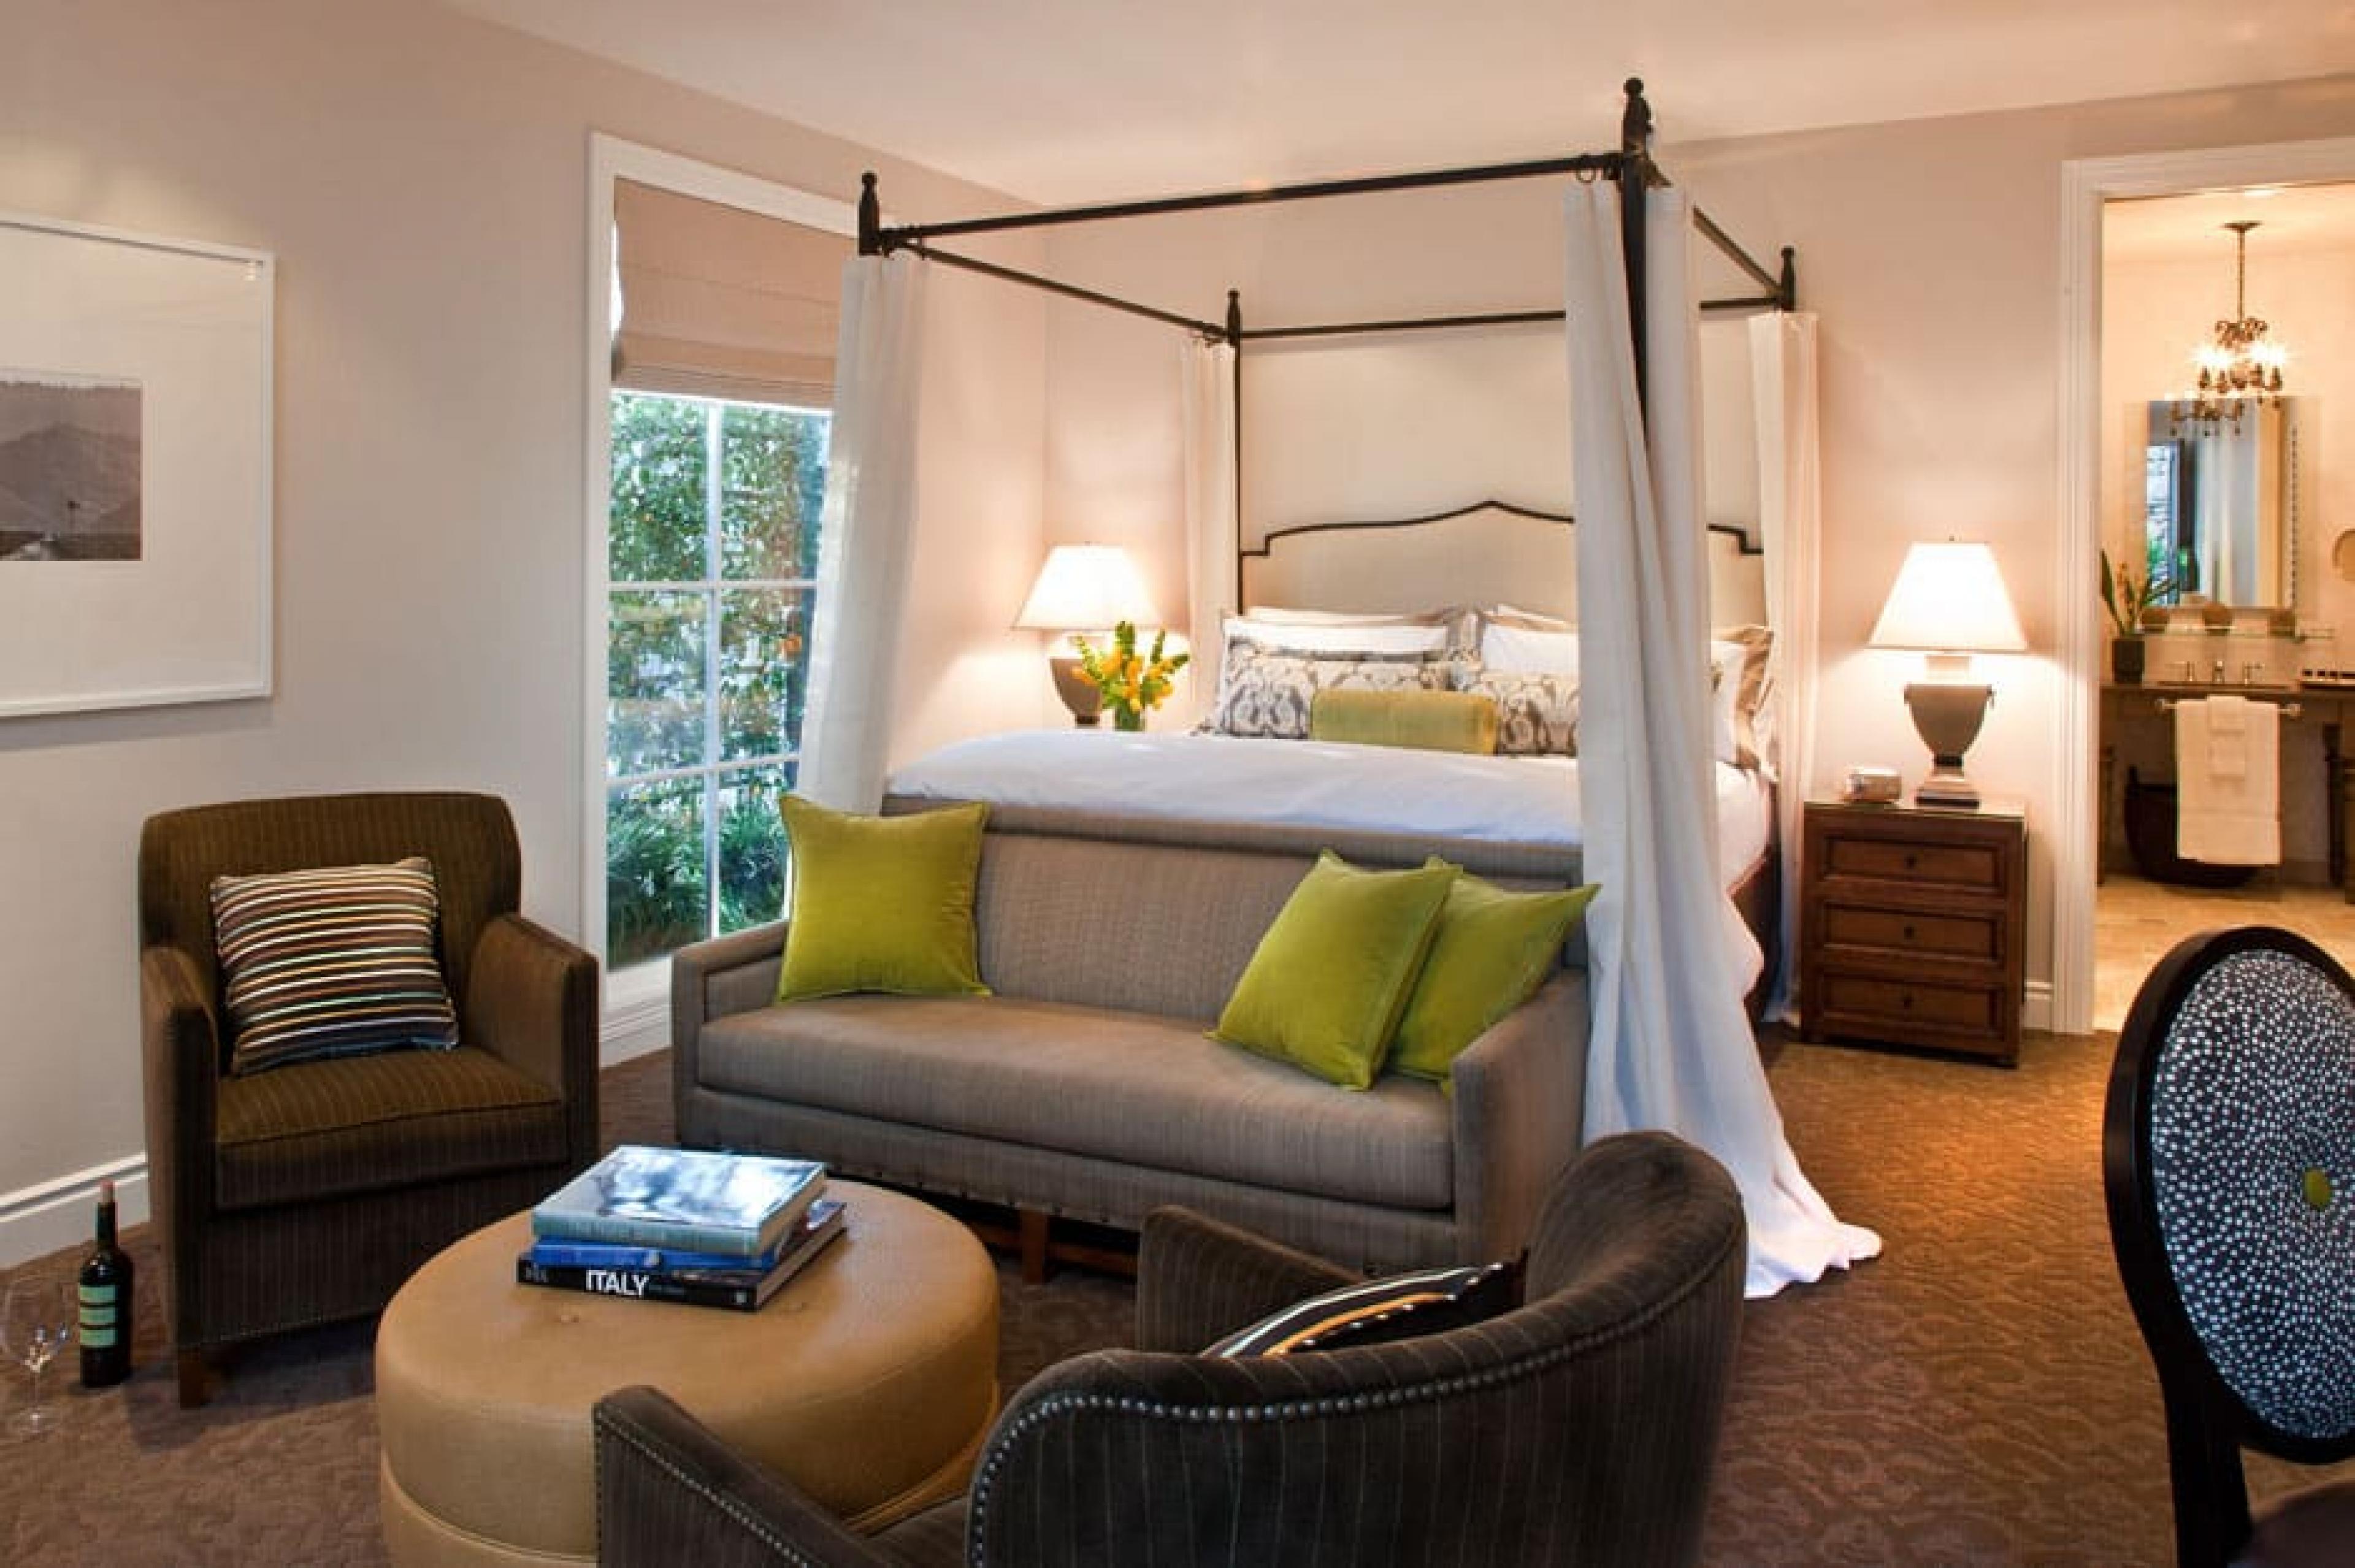 Deluxe King Room at Hotel Yountville, Napa Valley, California